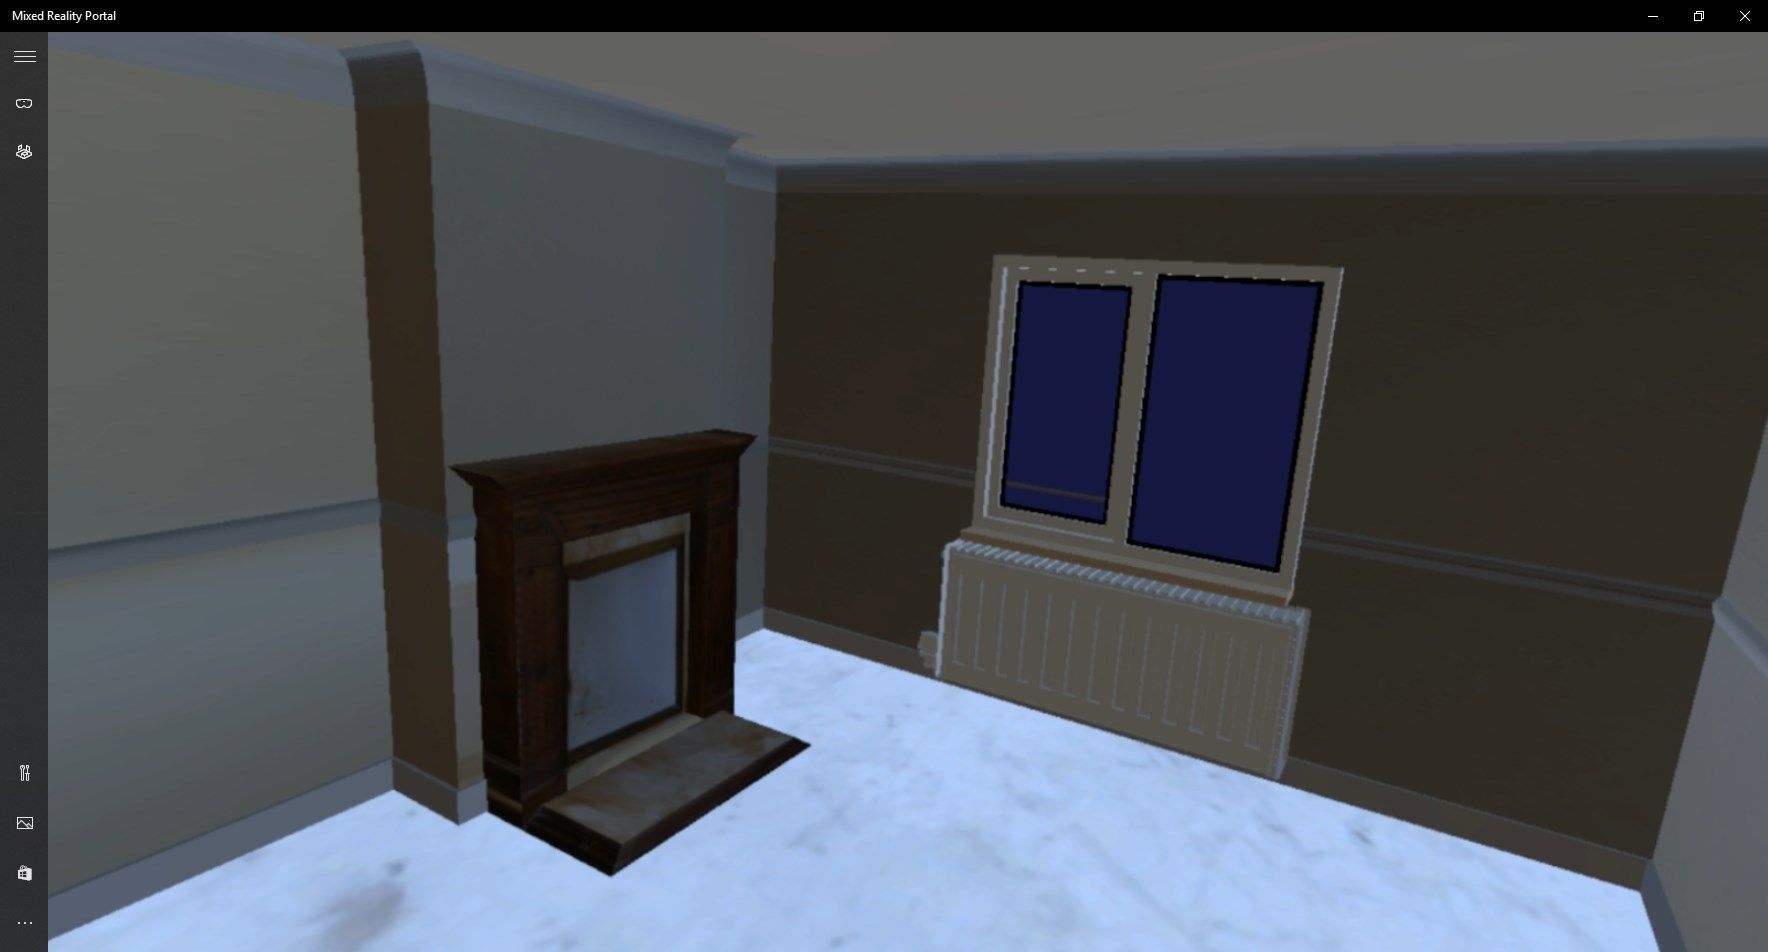 In App footage of a Basic Room Design.